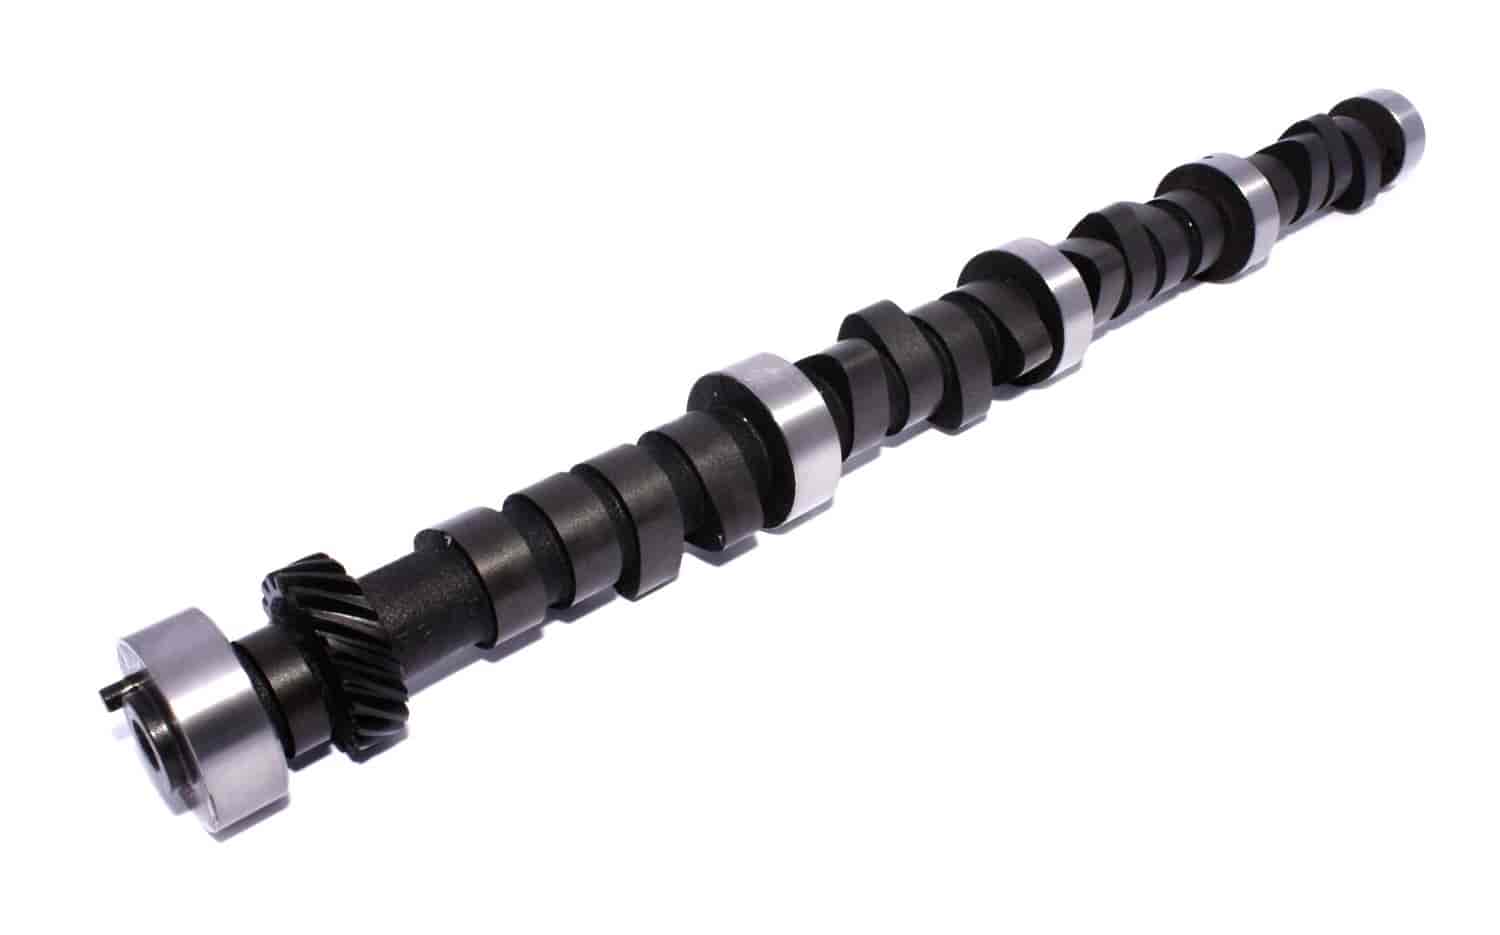 Xtreme Energy 268H Hydraulic Flat Tappet Camshaft Only Lift: .477" /.480" Duration: 268°/280° RPM Range: 1600-5800